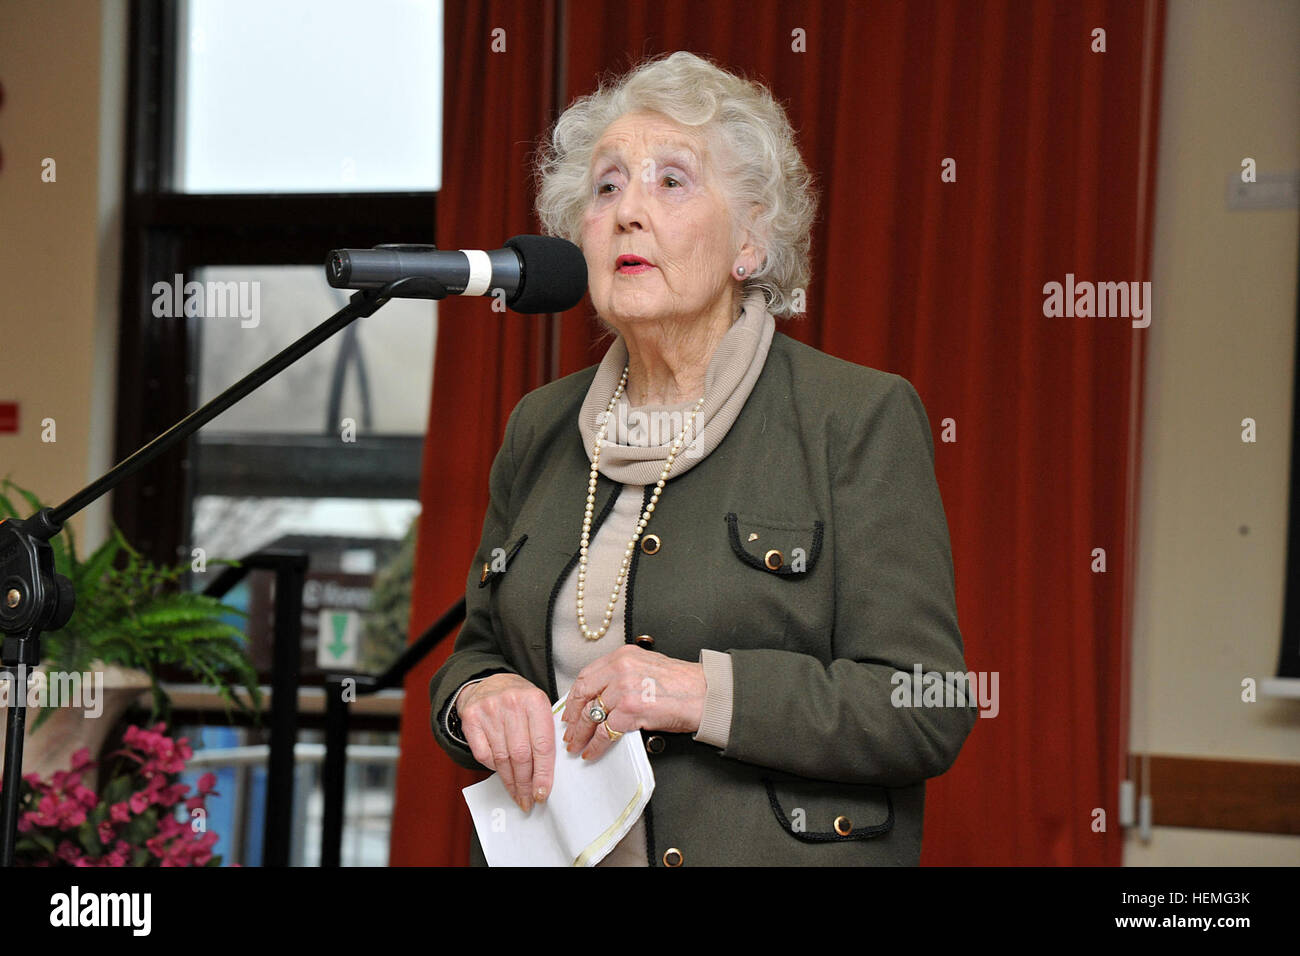 Noreen Riols speaks at a F2F (Female to Female) gathering , Caserma Ederle, Vicenza, Italy, March 28, 2013, as  part of Women's History Month. Rios trained spies for England during WWII for Winston Churchill and has authored several books. (U.S. Army photo by Paolo Bovo JM436 7 JMTC Vicenza - Italy/Released) Noreen Riols, World War II British spy 130328-A-JM436-023 Stock Photo